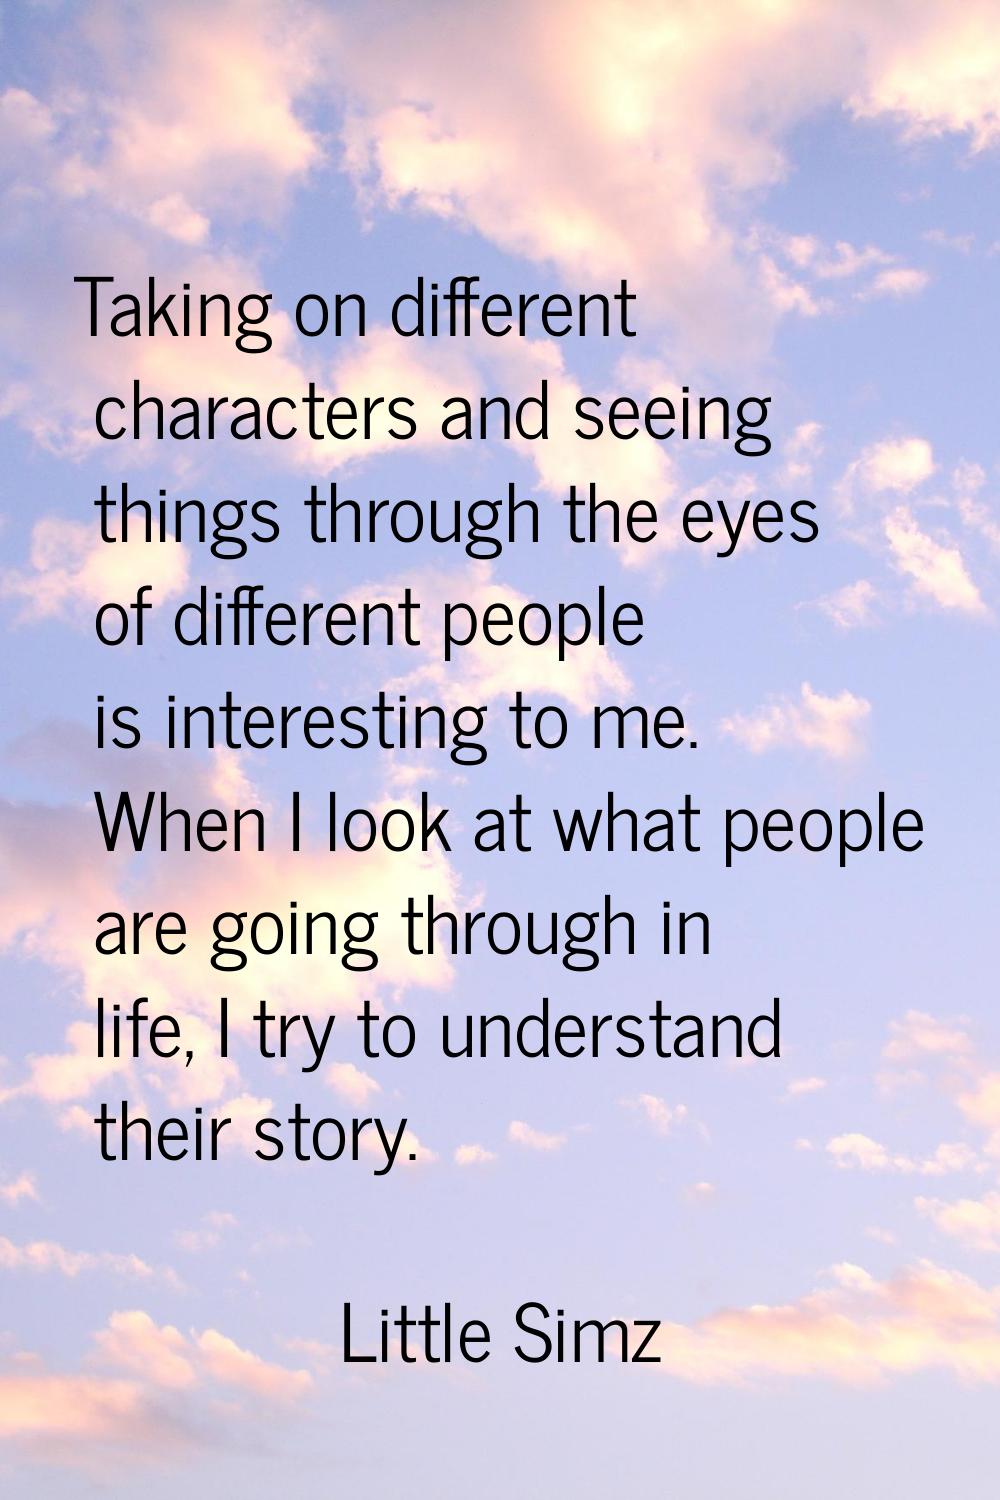 Taking on different characters and seeing things through the eyes of different people is interestin